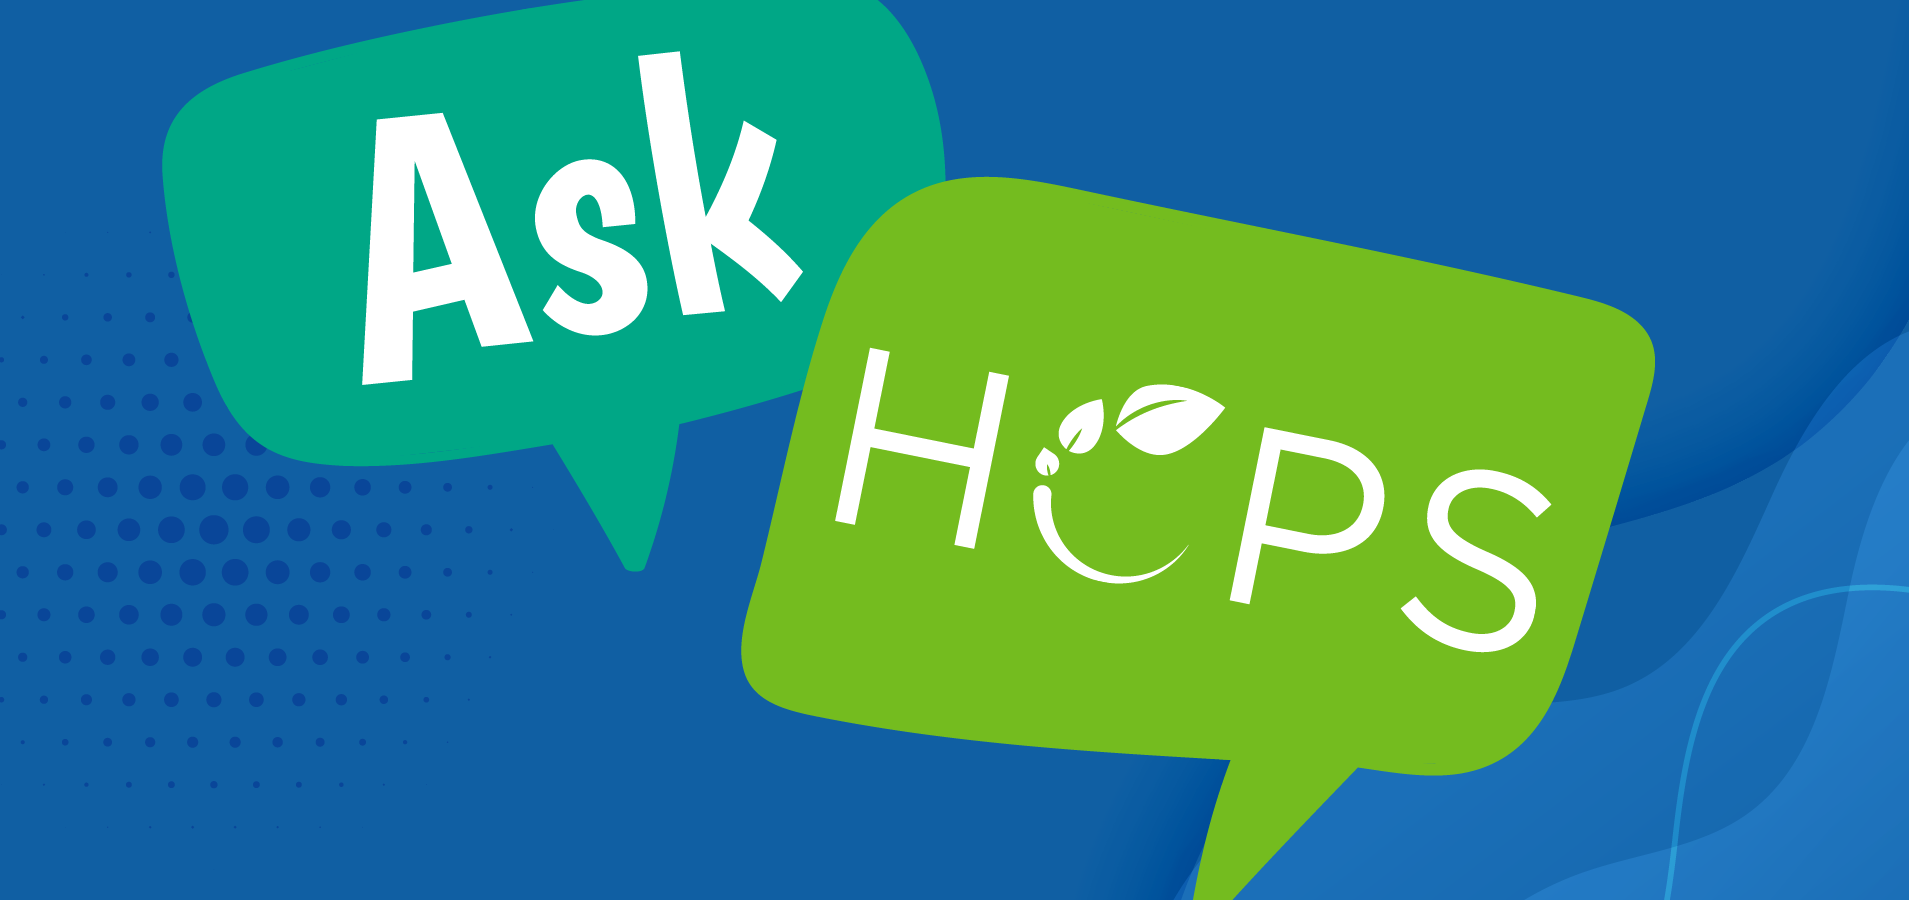 Have a question? Ask HCPS!